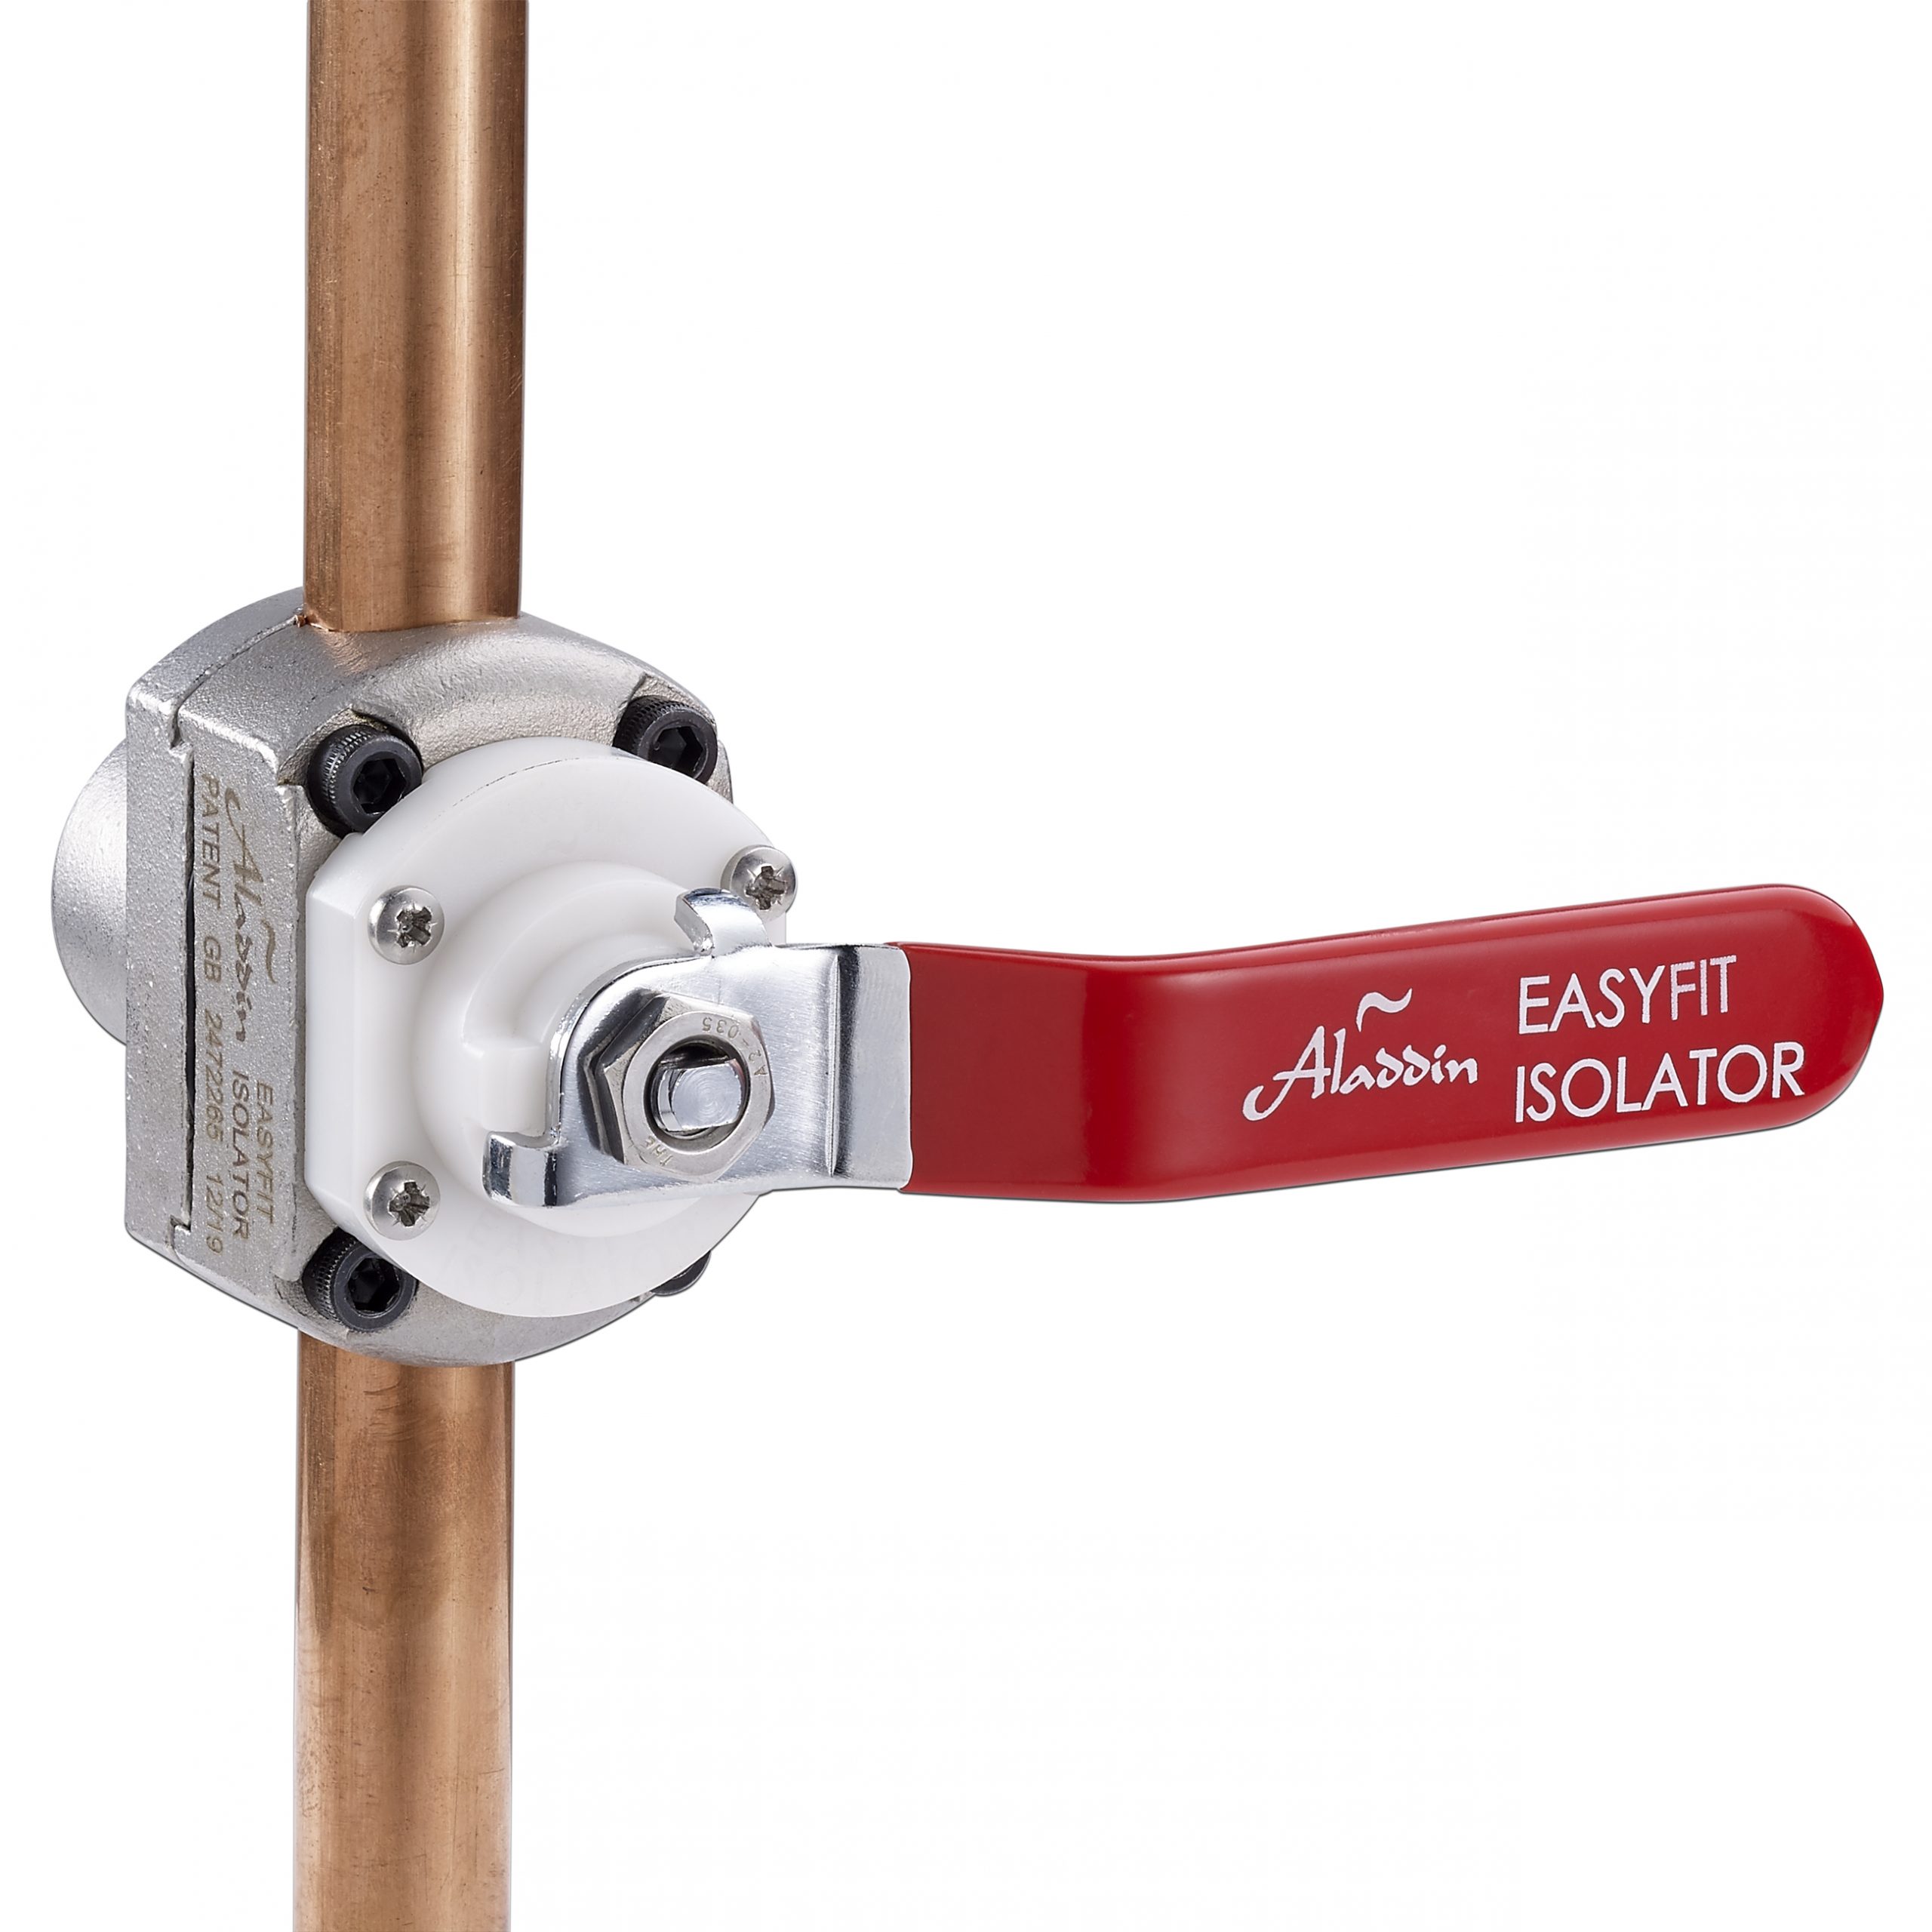 alt="Aladdin EasyFit Isolator shuts off live hot or cold water, no freezing or draining down burst pipes or seized ball valve/stopcock/gate valve.">